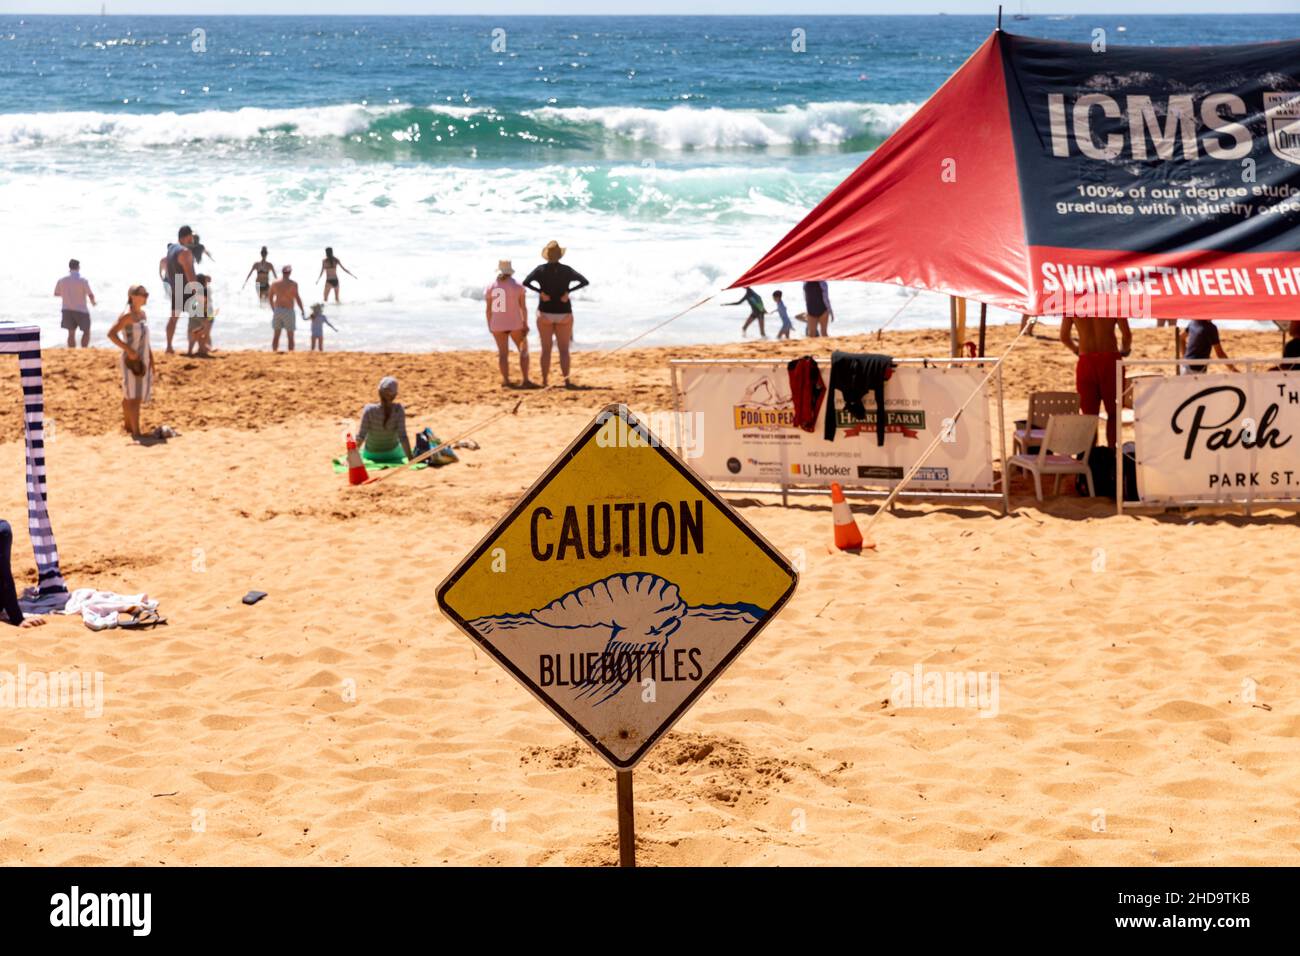 Newport Beach in Sydney, summers day with caution bluebottles sign erected and surf rescue tent - swim between the flags- Sydney,Australia Stock Photo